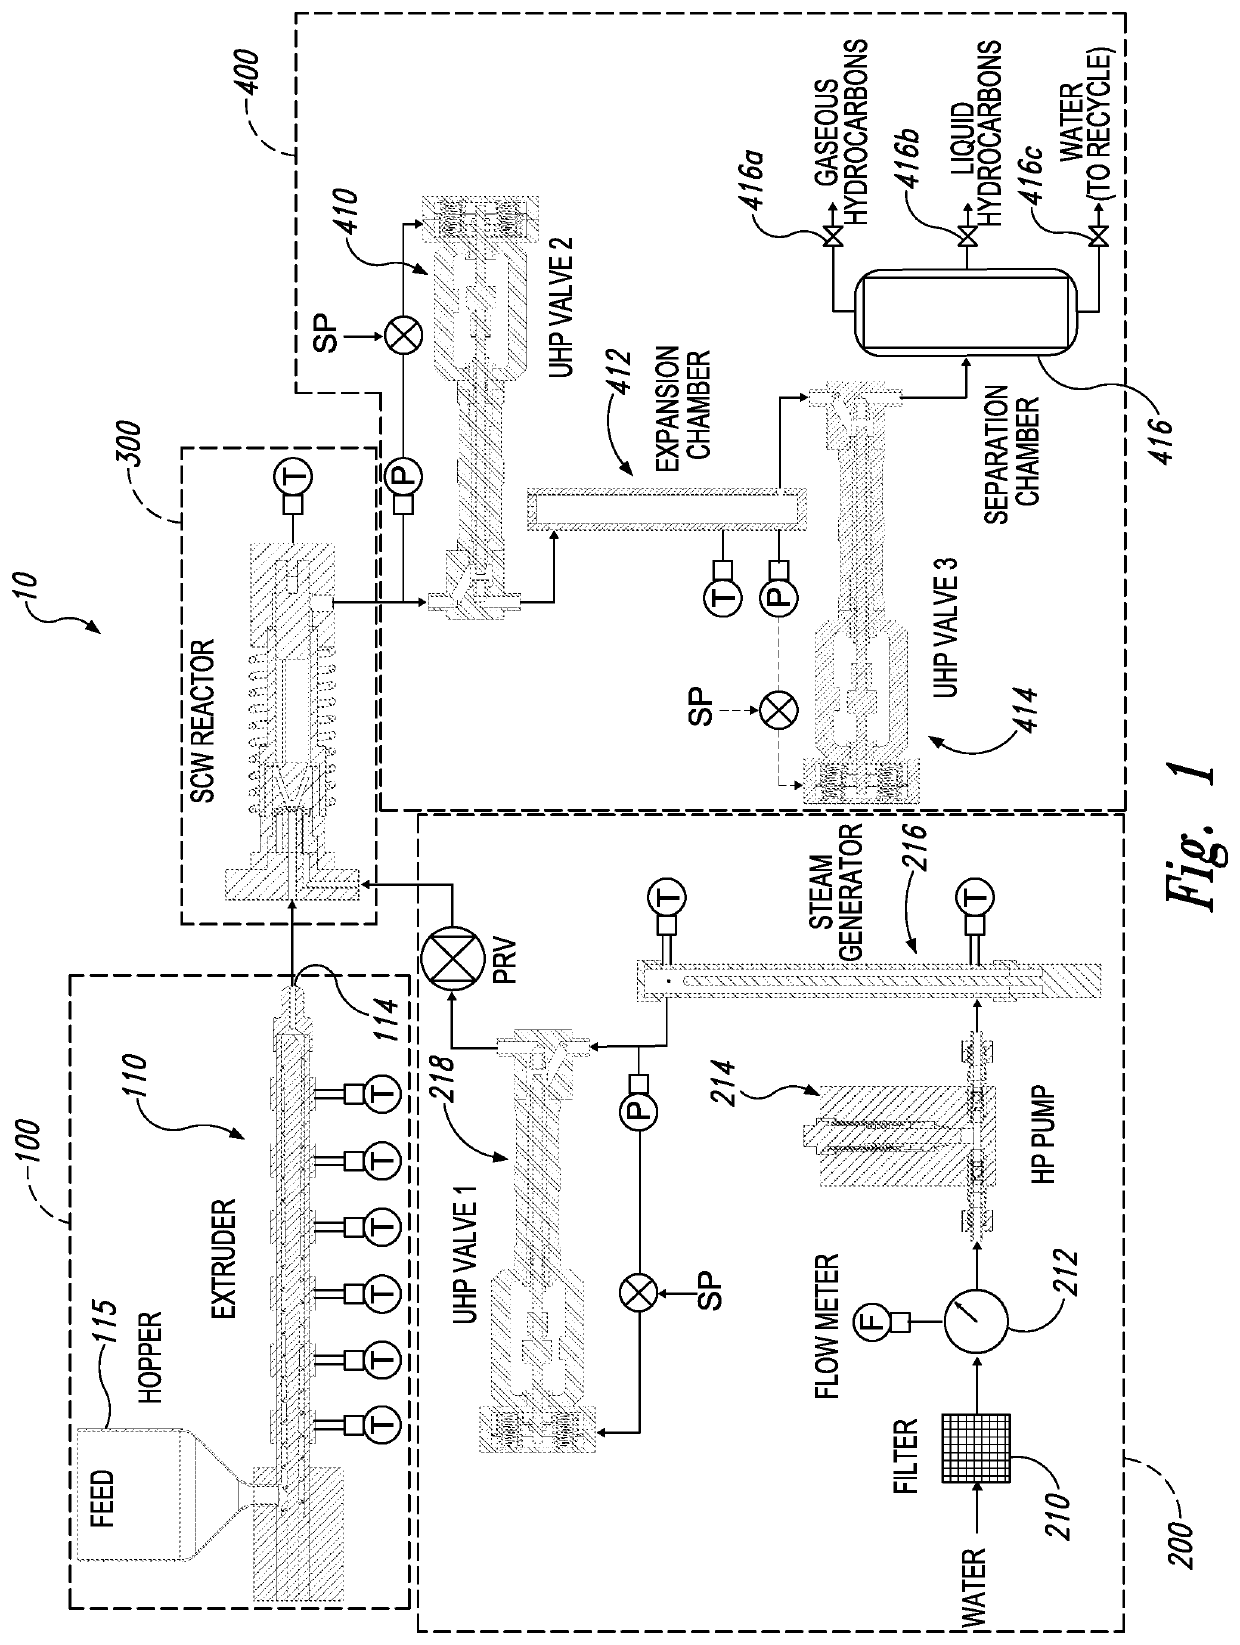 Machine and methods for transforming biomass and/or waste plastics via supercritical water reaction